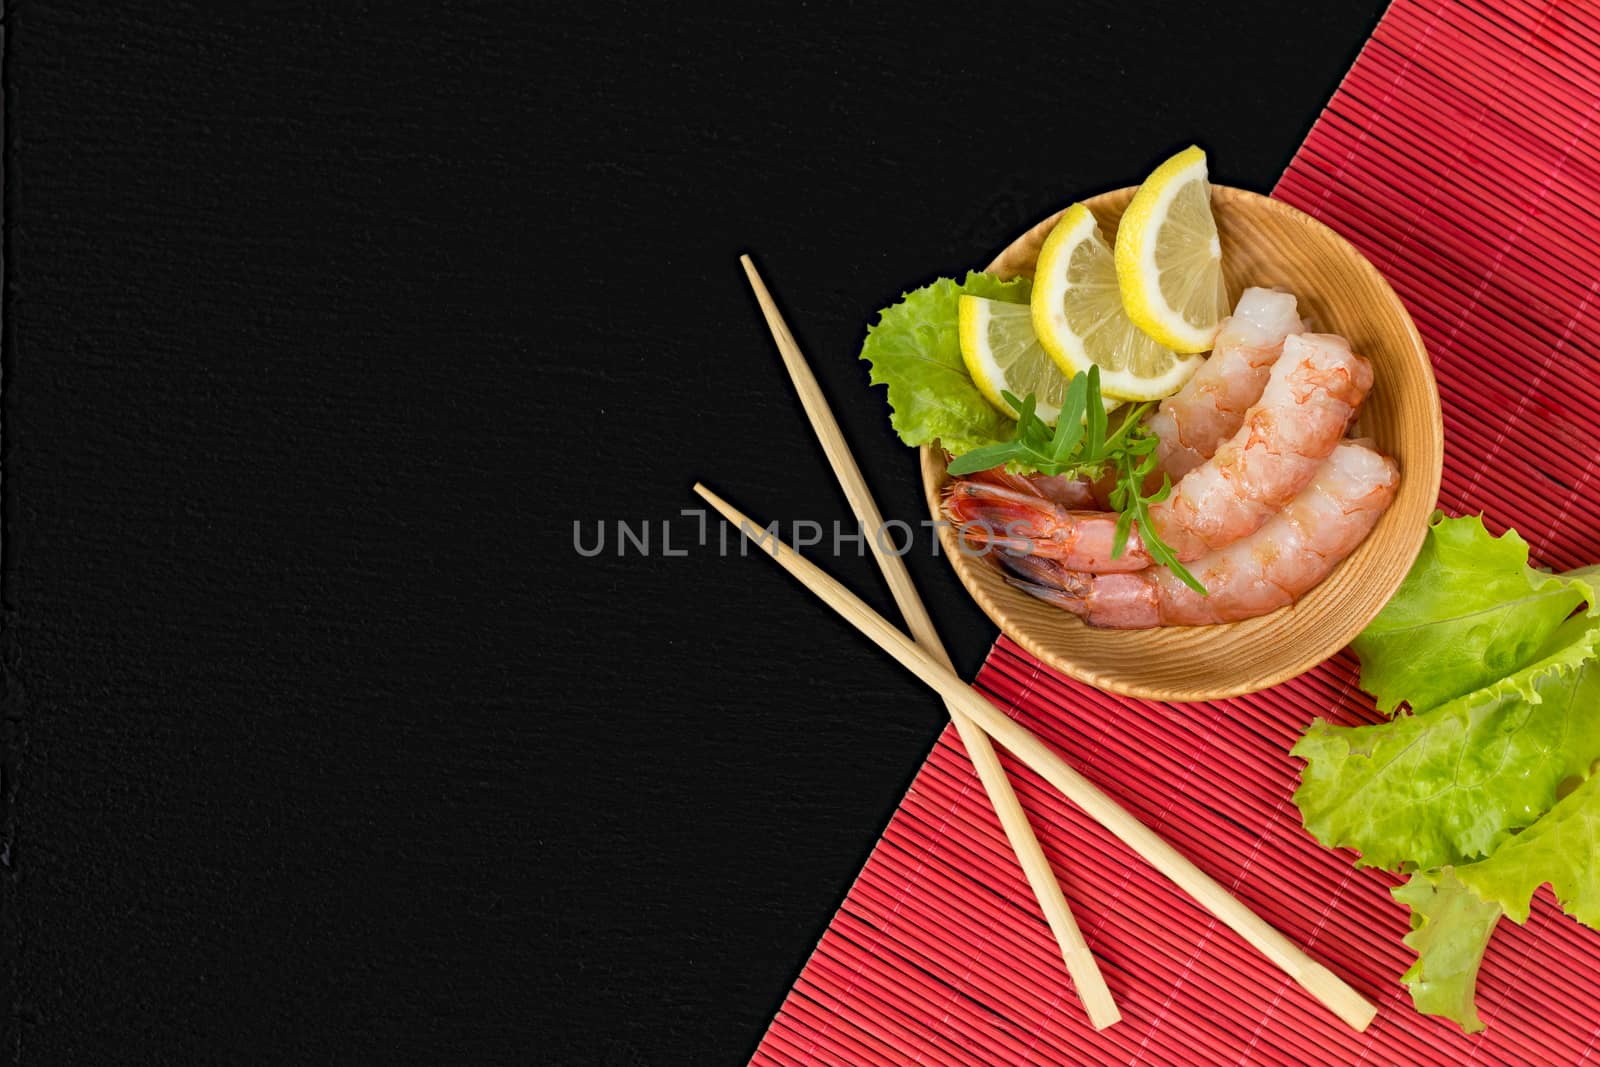 Shrimp on a wooden plate with wooden chopsticks by ArtSvitlyna